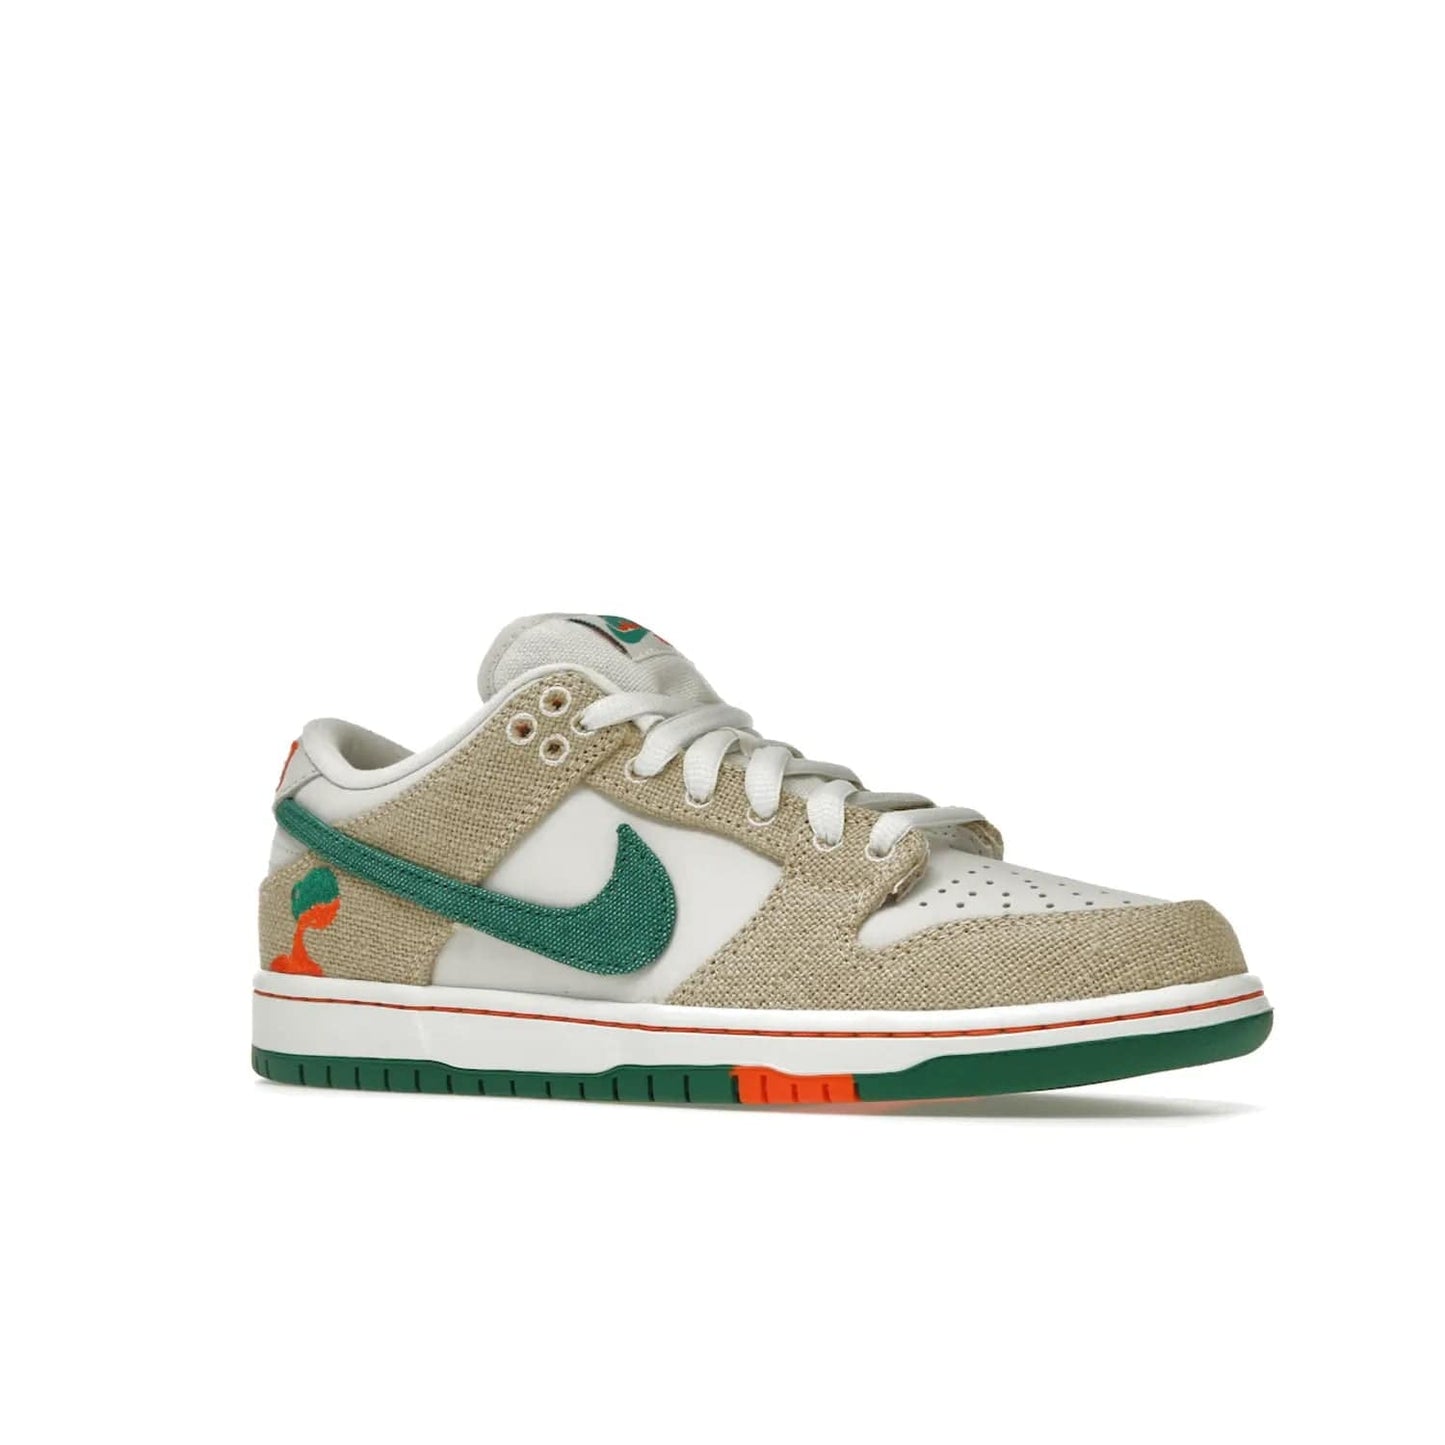 Nike SB Dunk Low Jarritos - Image 4 - Only at www.BallersClubKickz.com - Shop limited edition Nike SB Dunk Low Jarritos! Crafted with white leather and tear-away canvas materials with green accents. Includes orange, green, and white laces to customize your look. Available now.